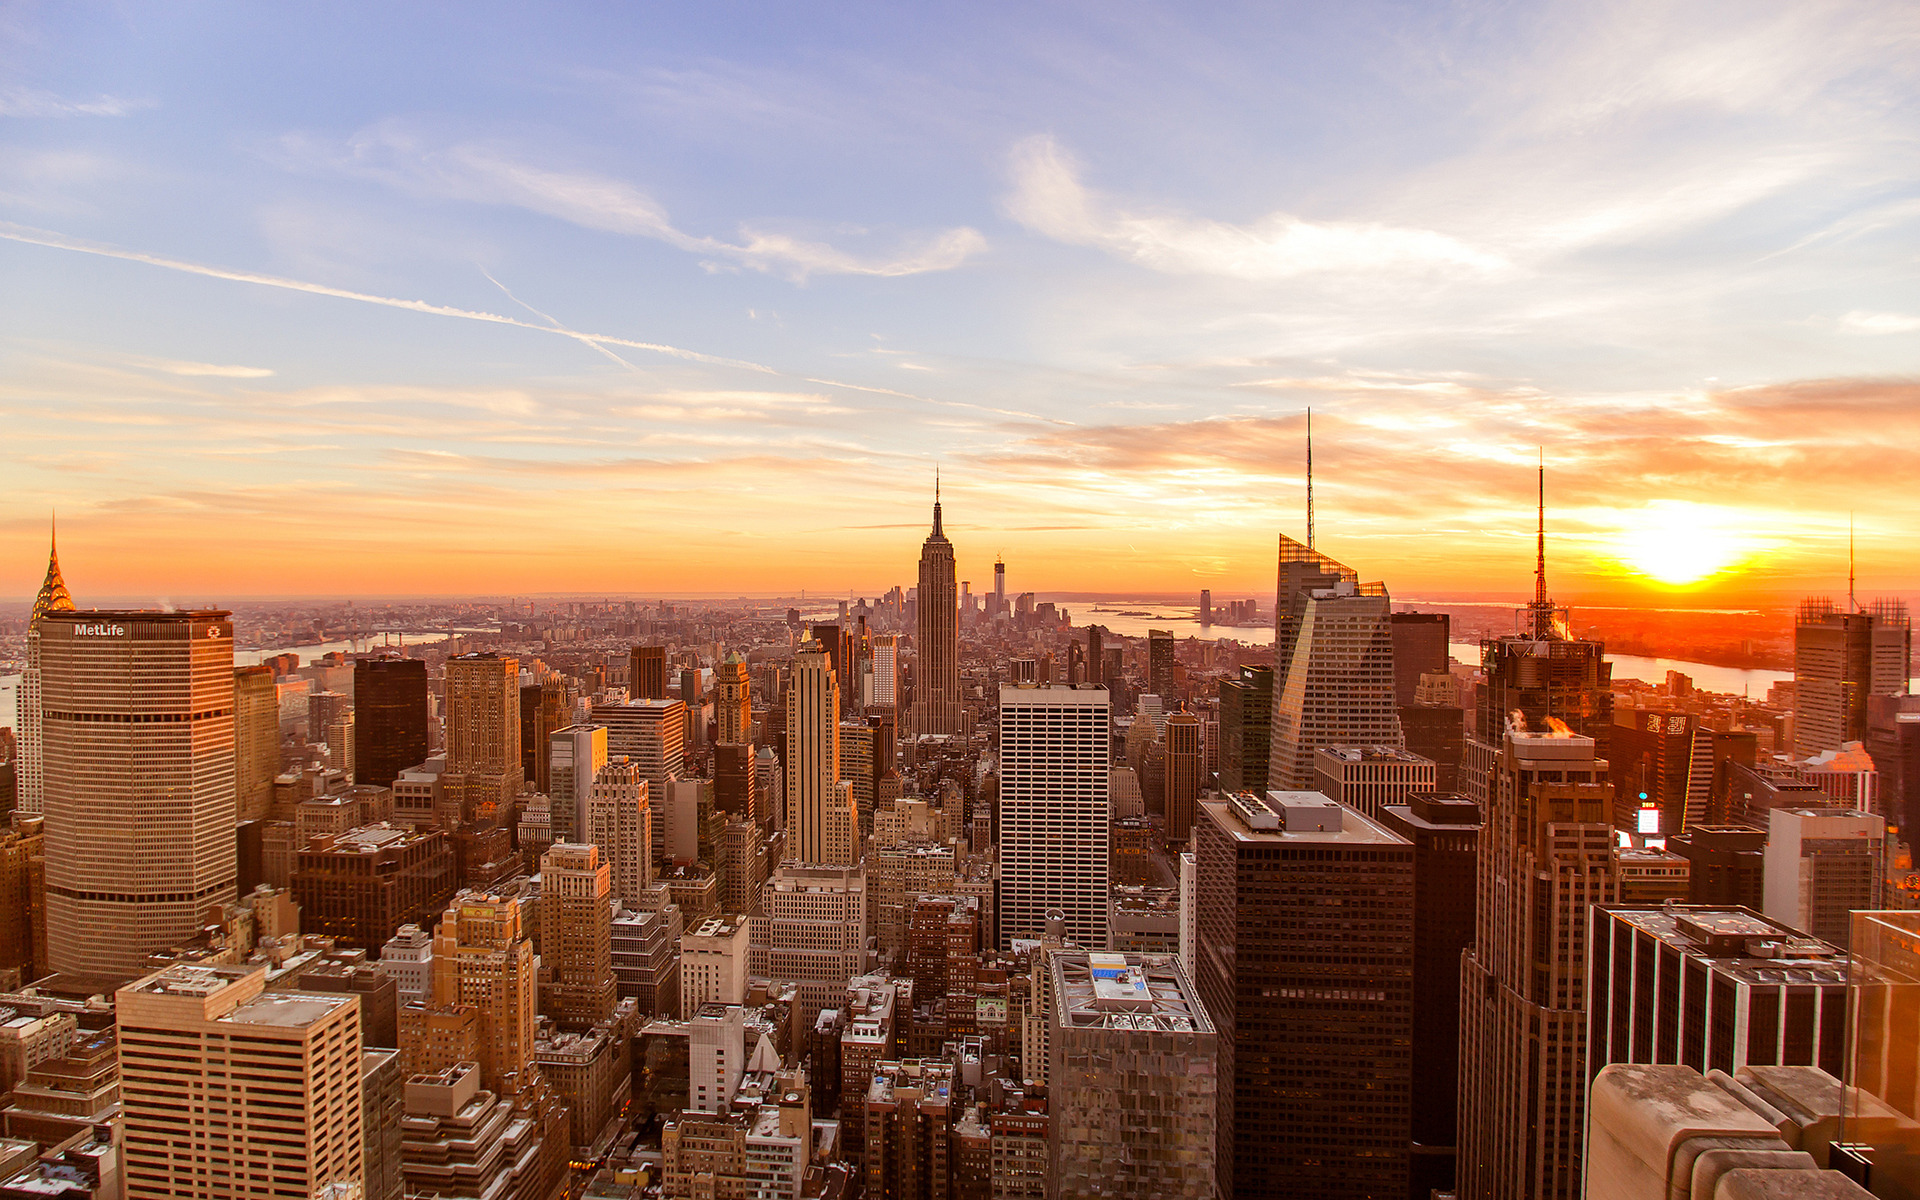 HD New York Wallpapers Are A Depiction Of Western Culture And